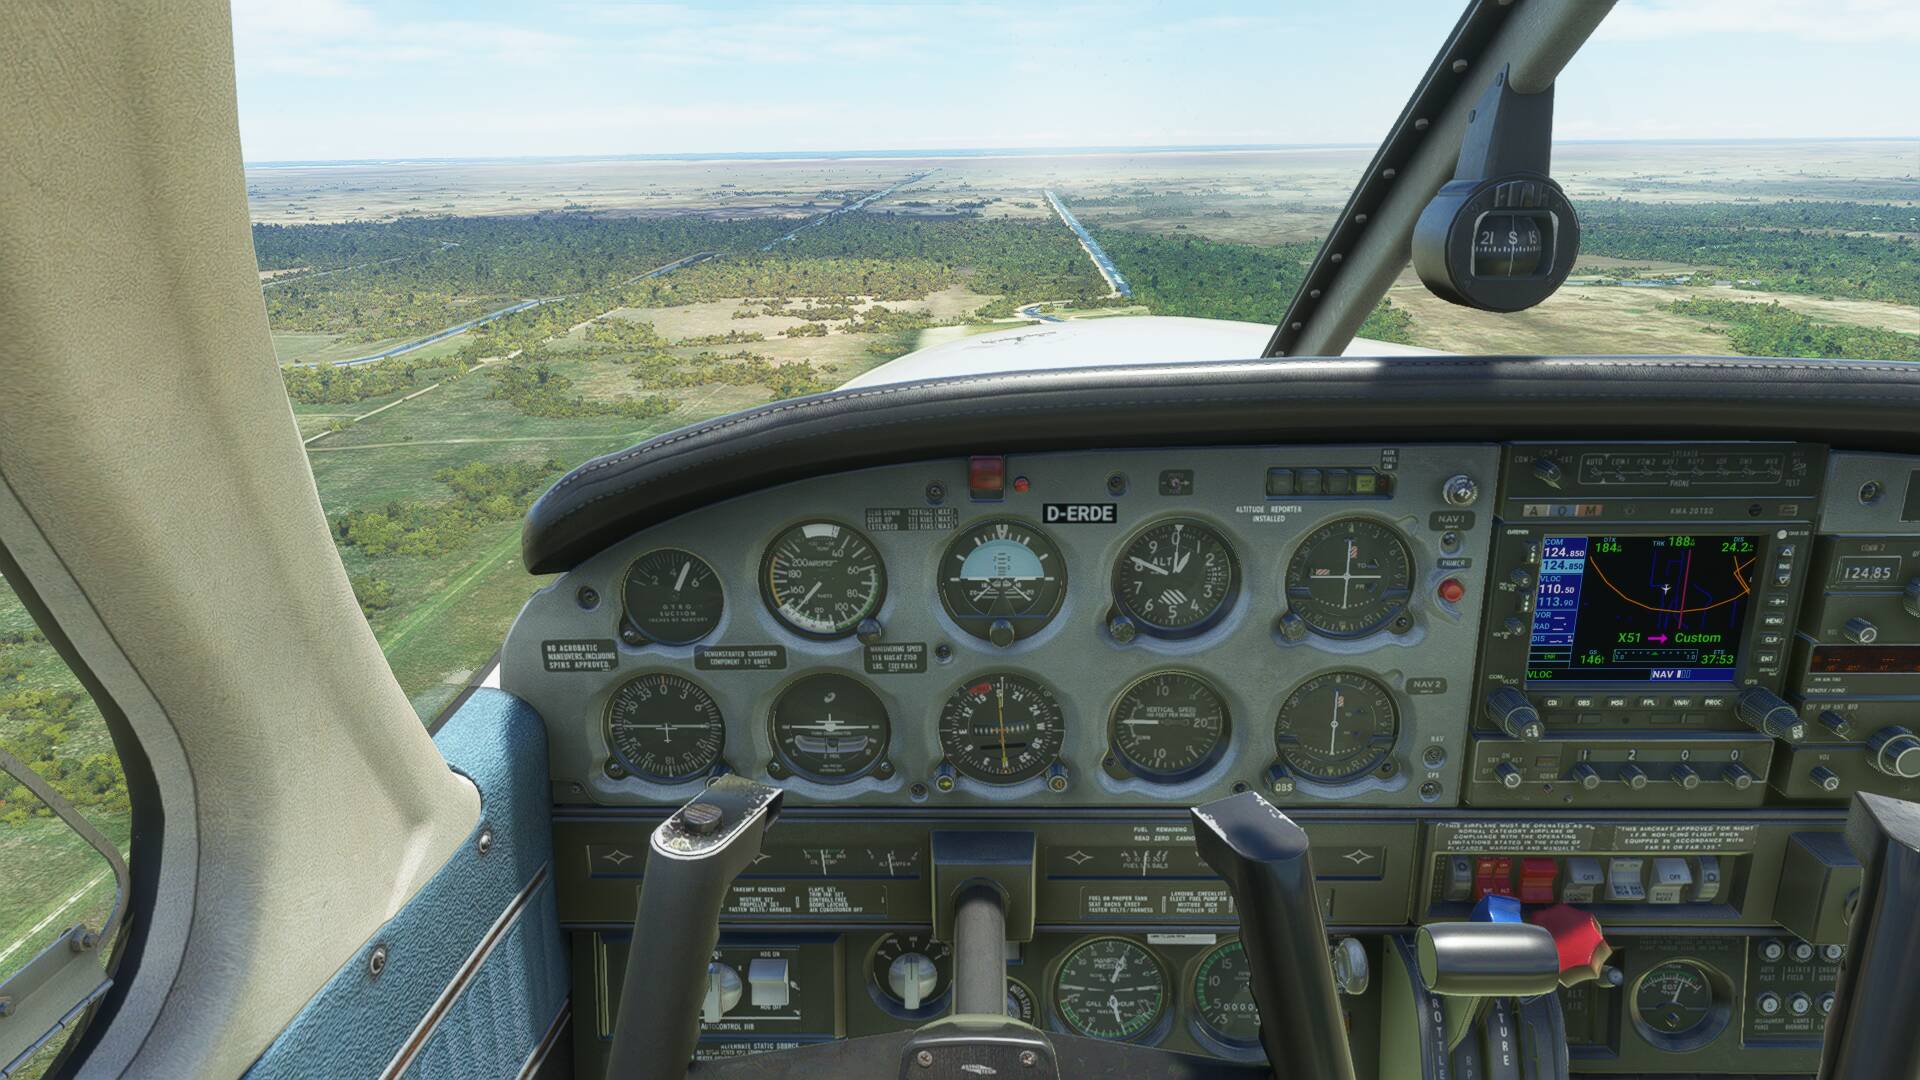 Aerofly FS Flight Simulator  The JanuaryFebruary 2020 submission contest  is now over Congratulations to GaryT Aerofly FS2 User Name for winning  the JanuaryFebruary 2020 screenshot contest Be sure to check out